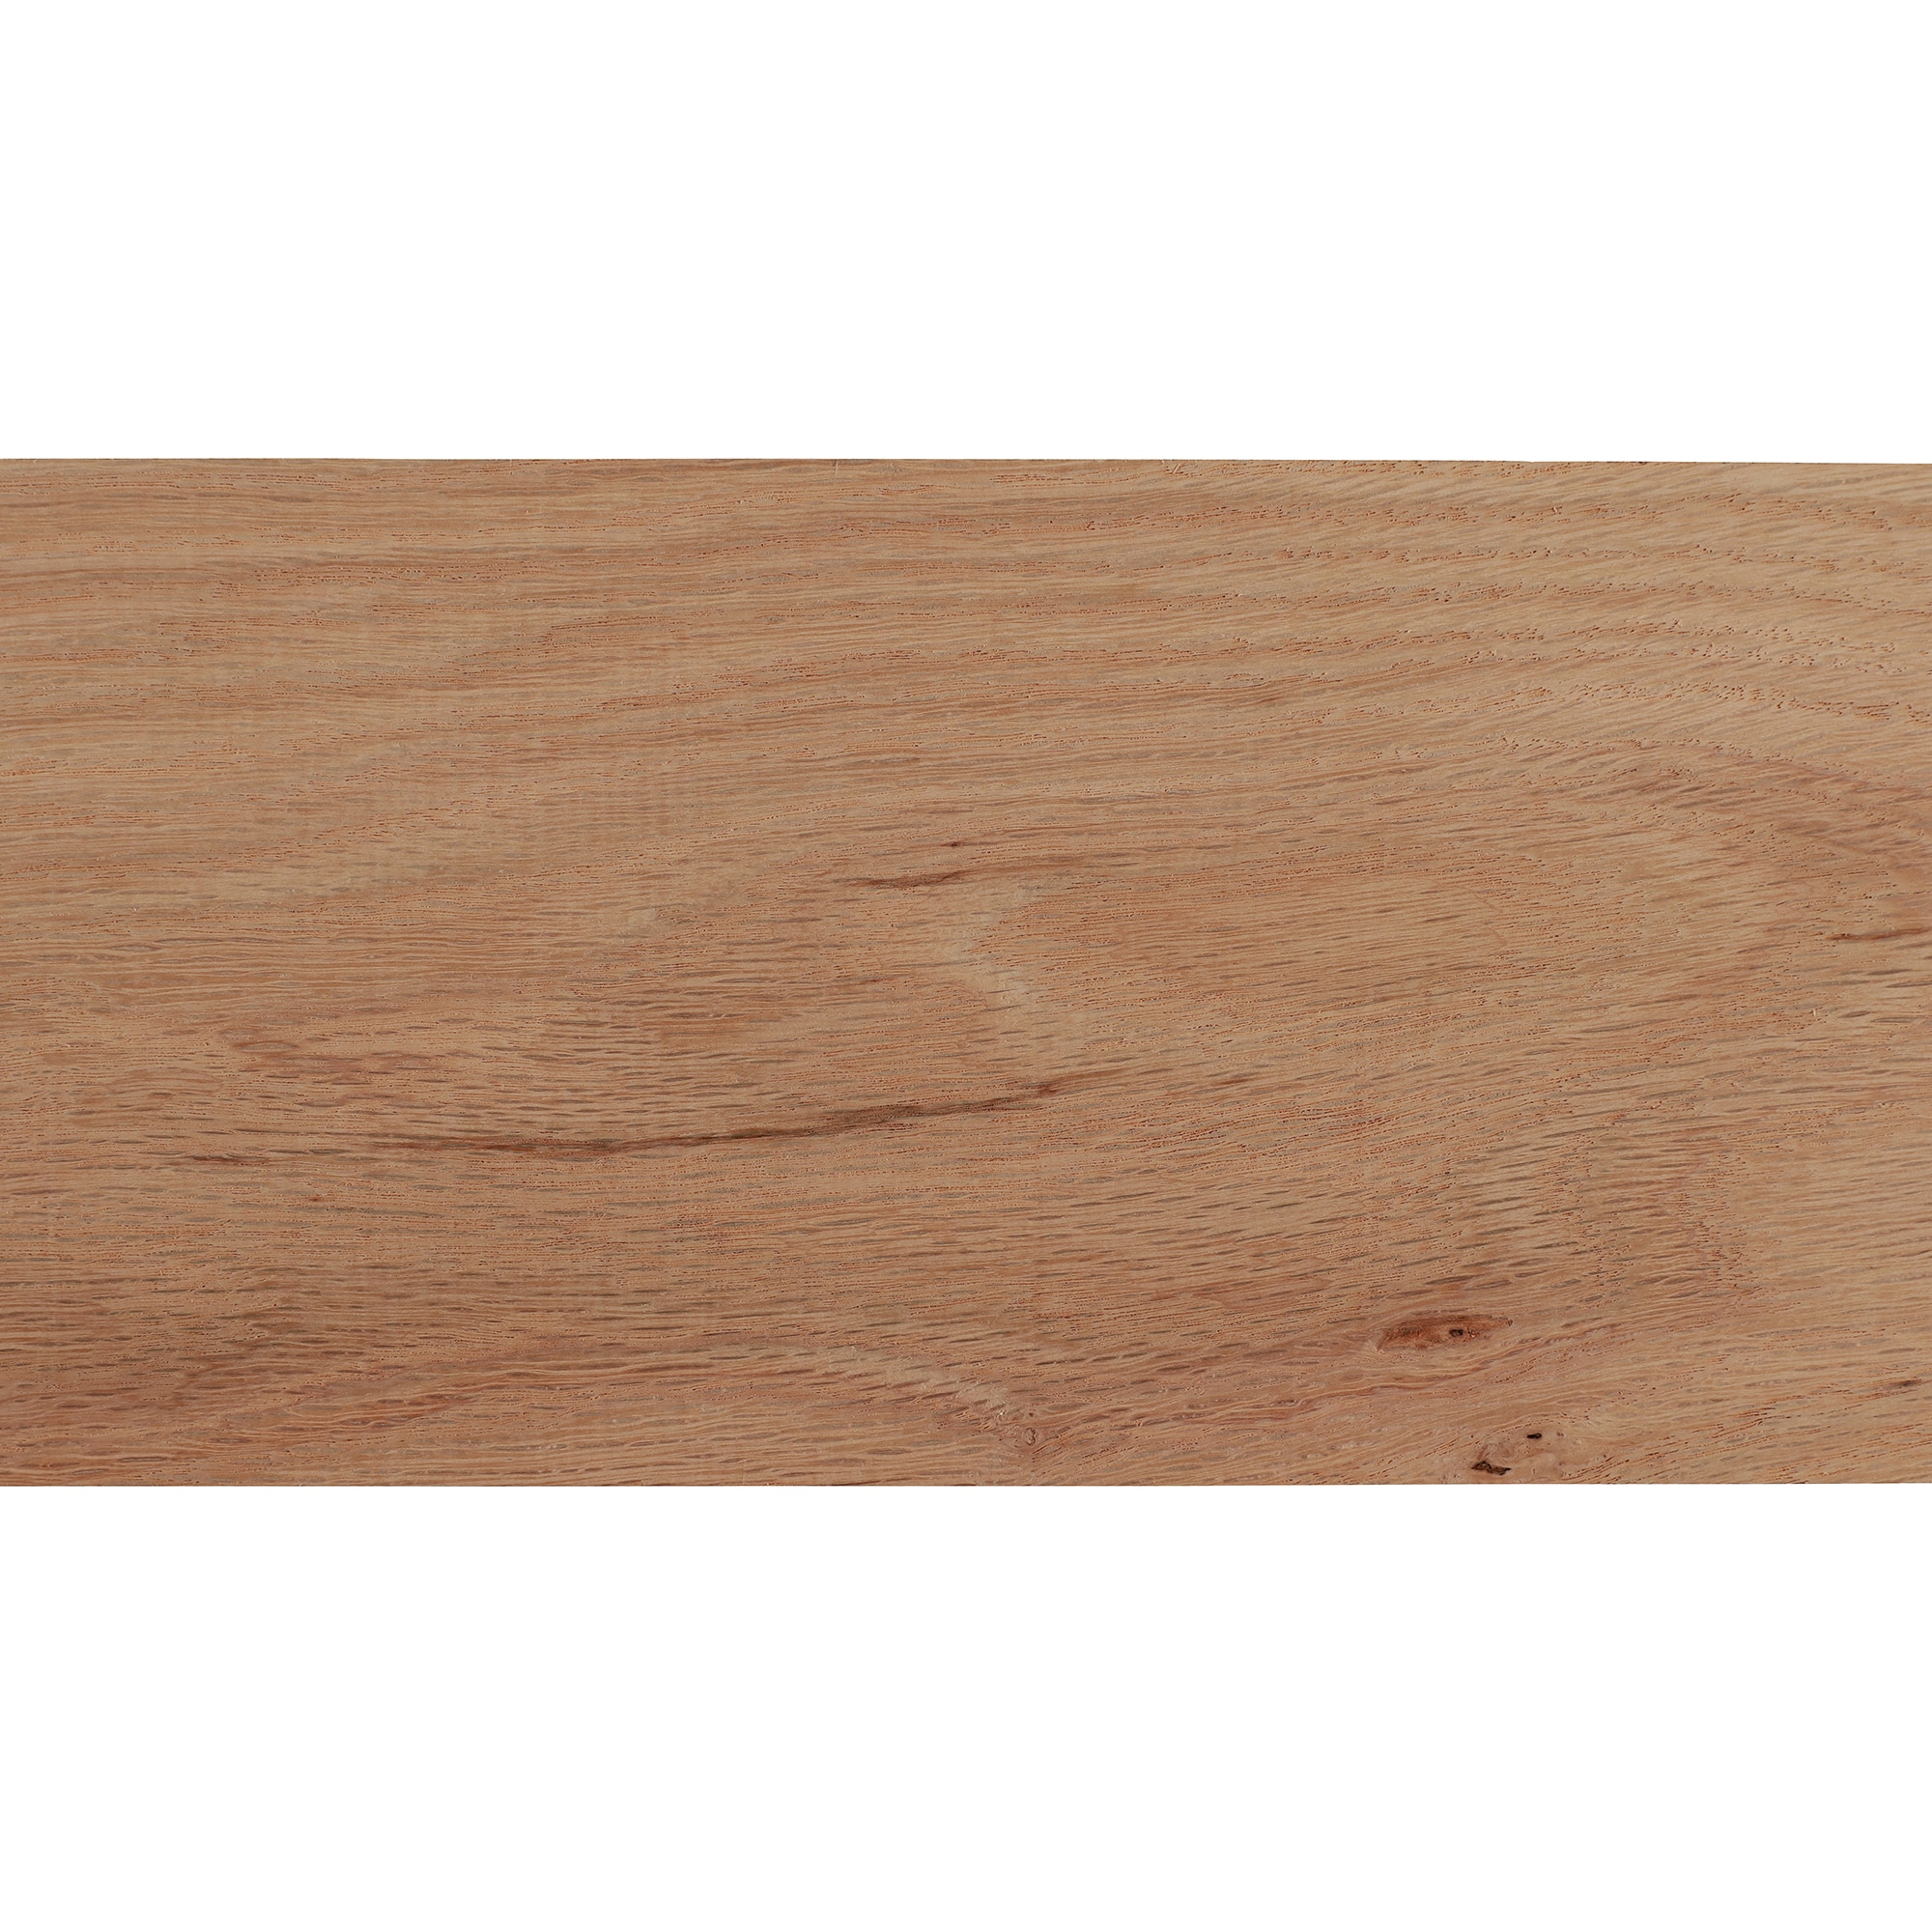 1 in. x 6 in. x 10 ft. S4S Red Oak Board 805165 - The Home Depot